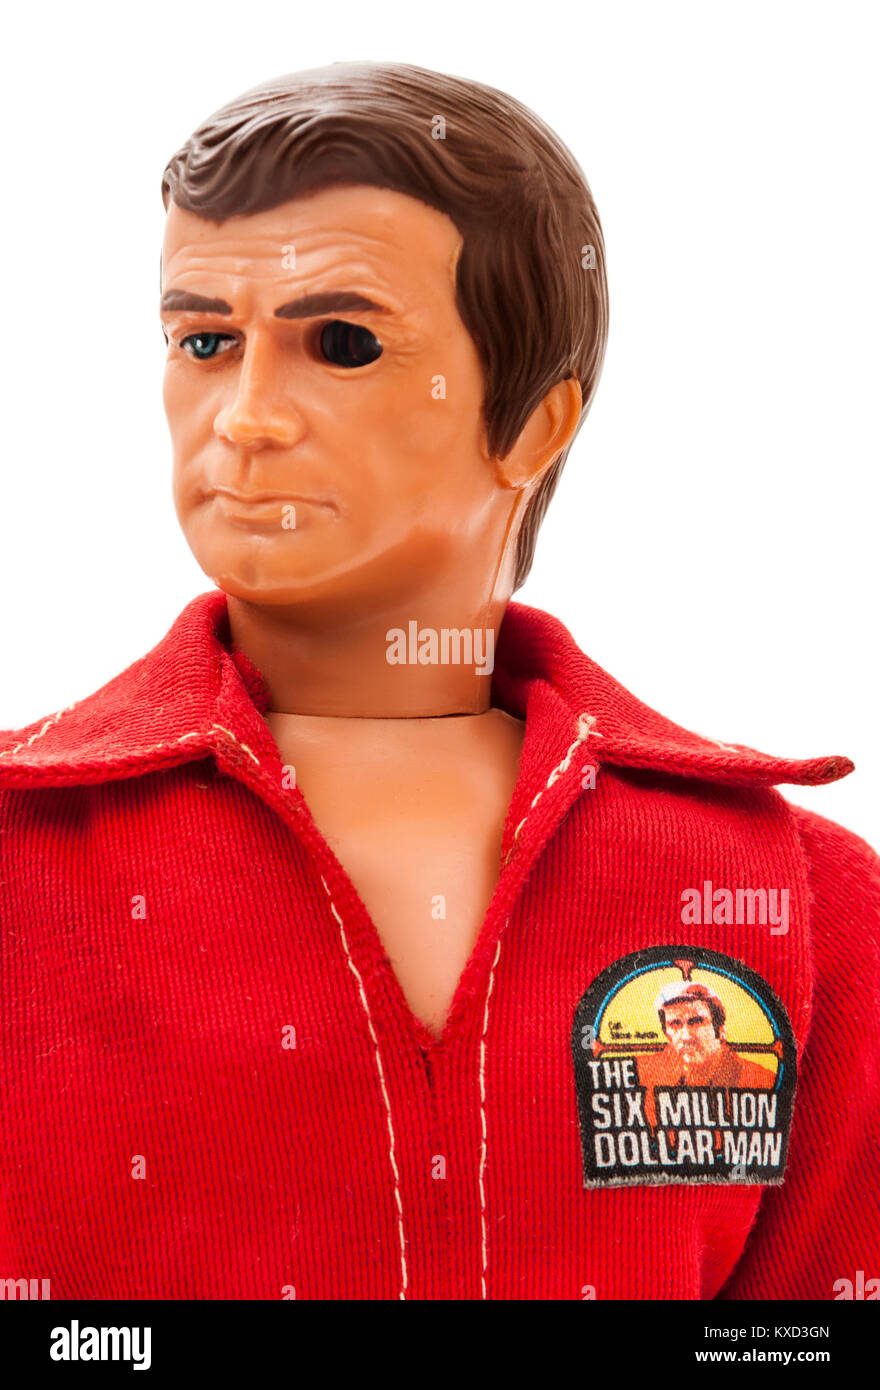 Steve Austin, the Six Million Dollar Man with bionic arm and eye (Kenner Products, 1975) from the popular TV series Stock Photo